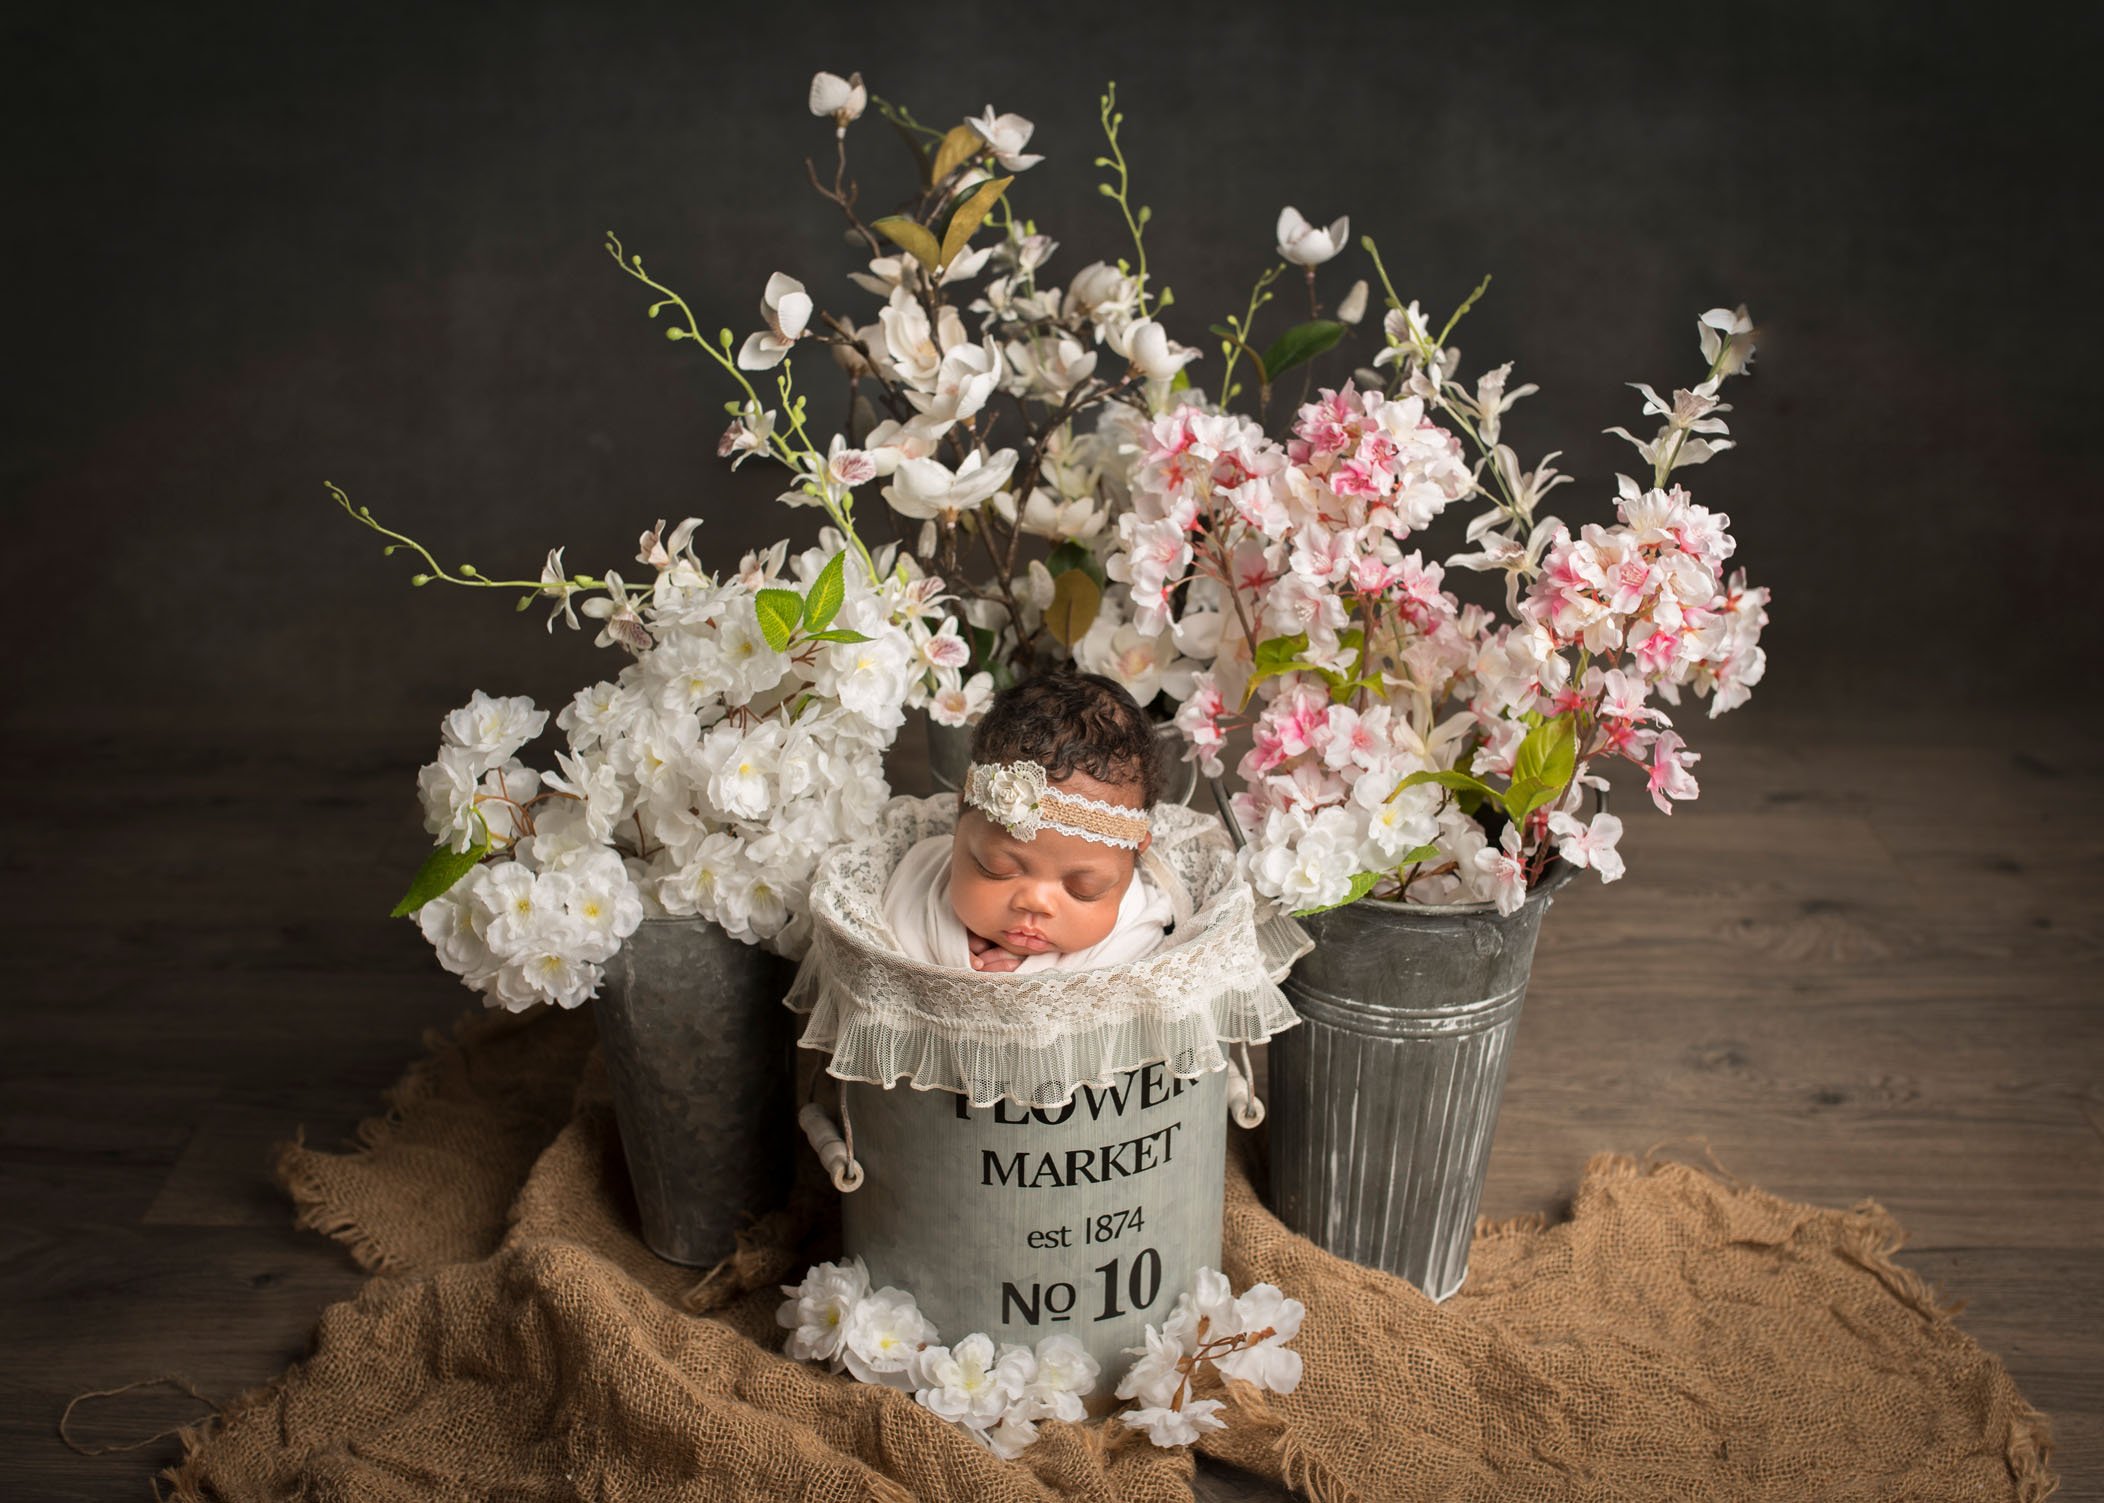 african-american newborn baby girl sleeping in a flower market bucket surrounded by spring flowers